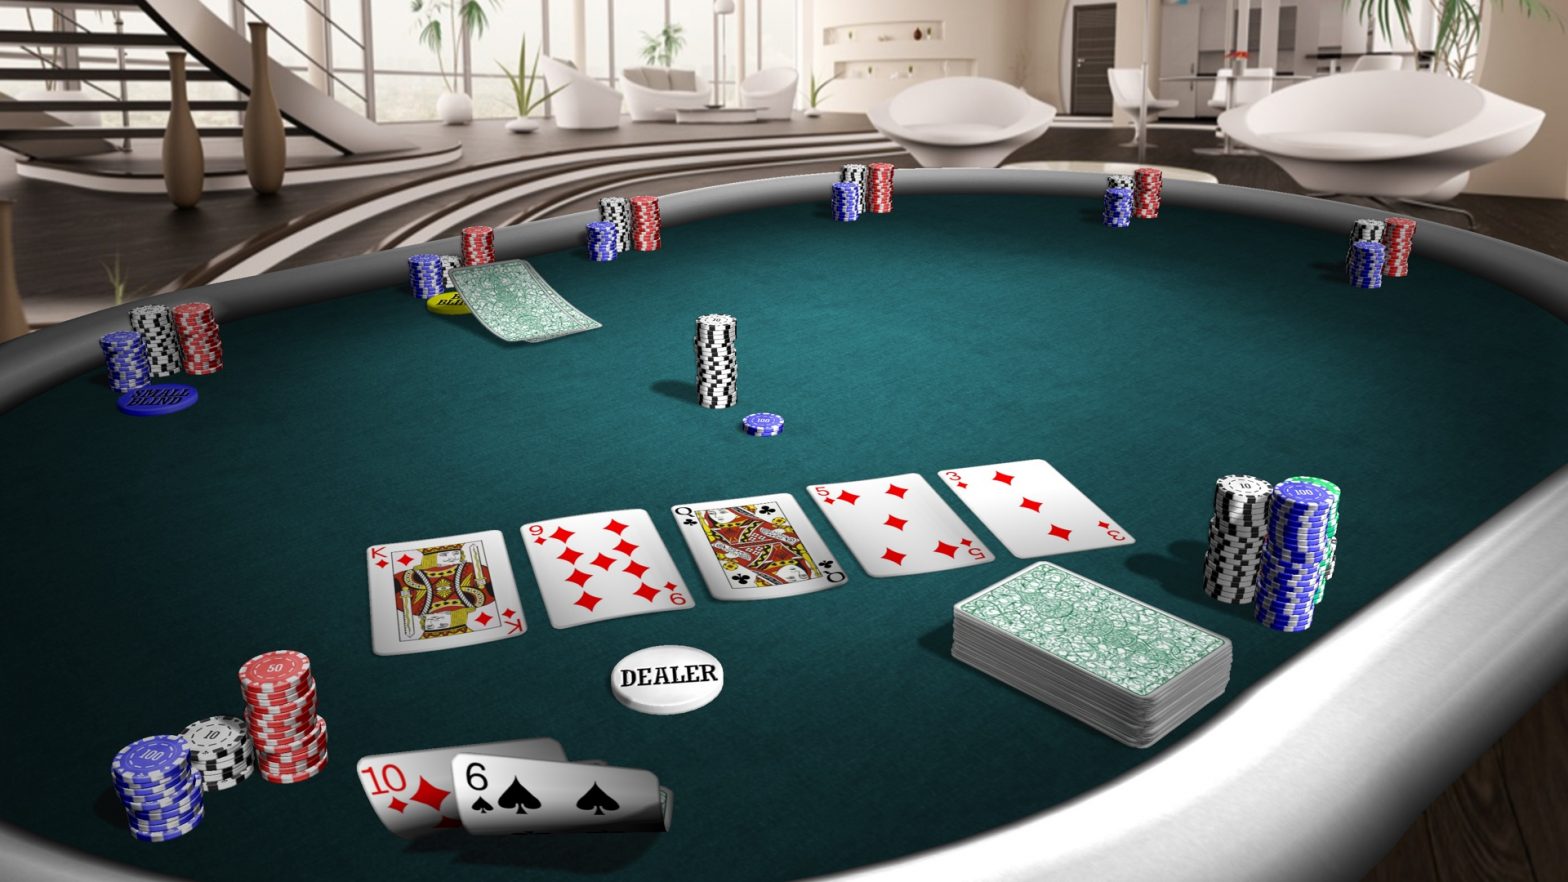 Tips You Need to Know Before Starting Online Poker